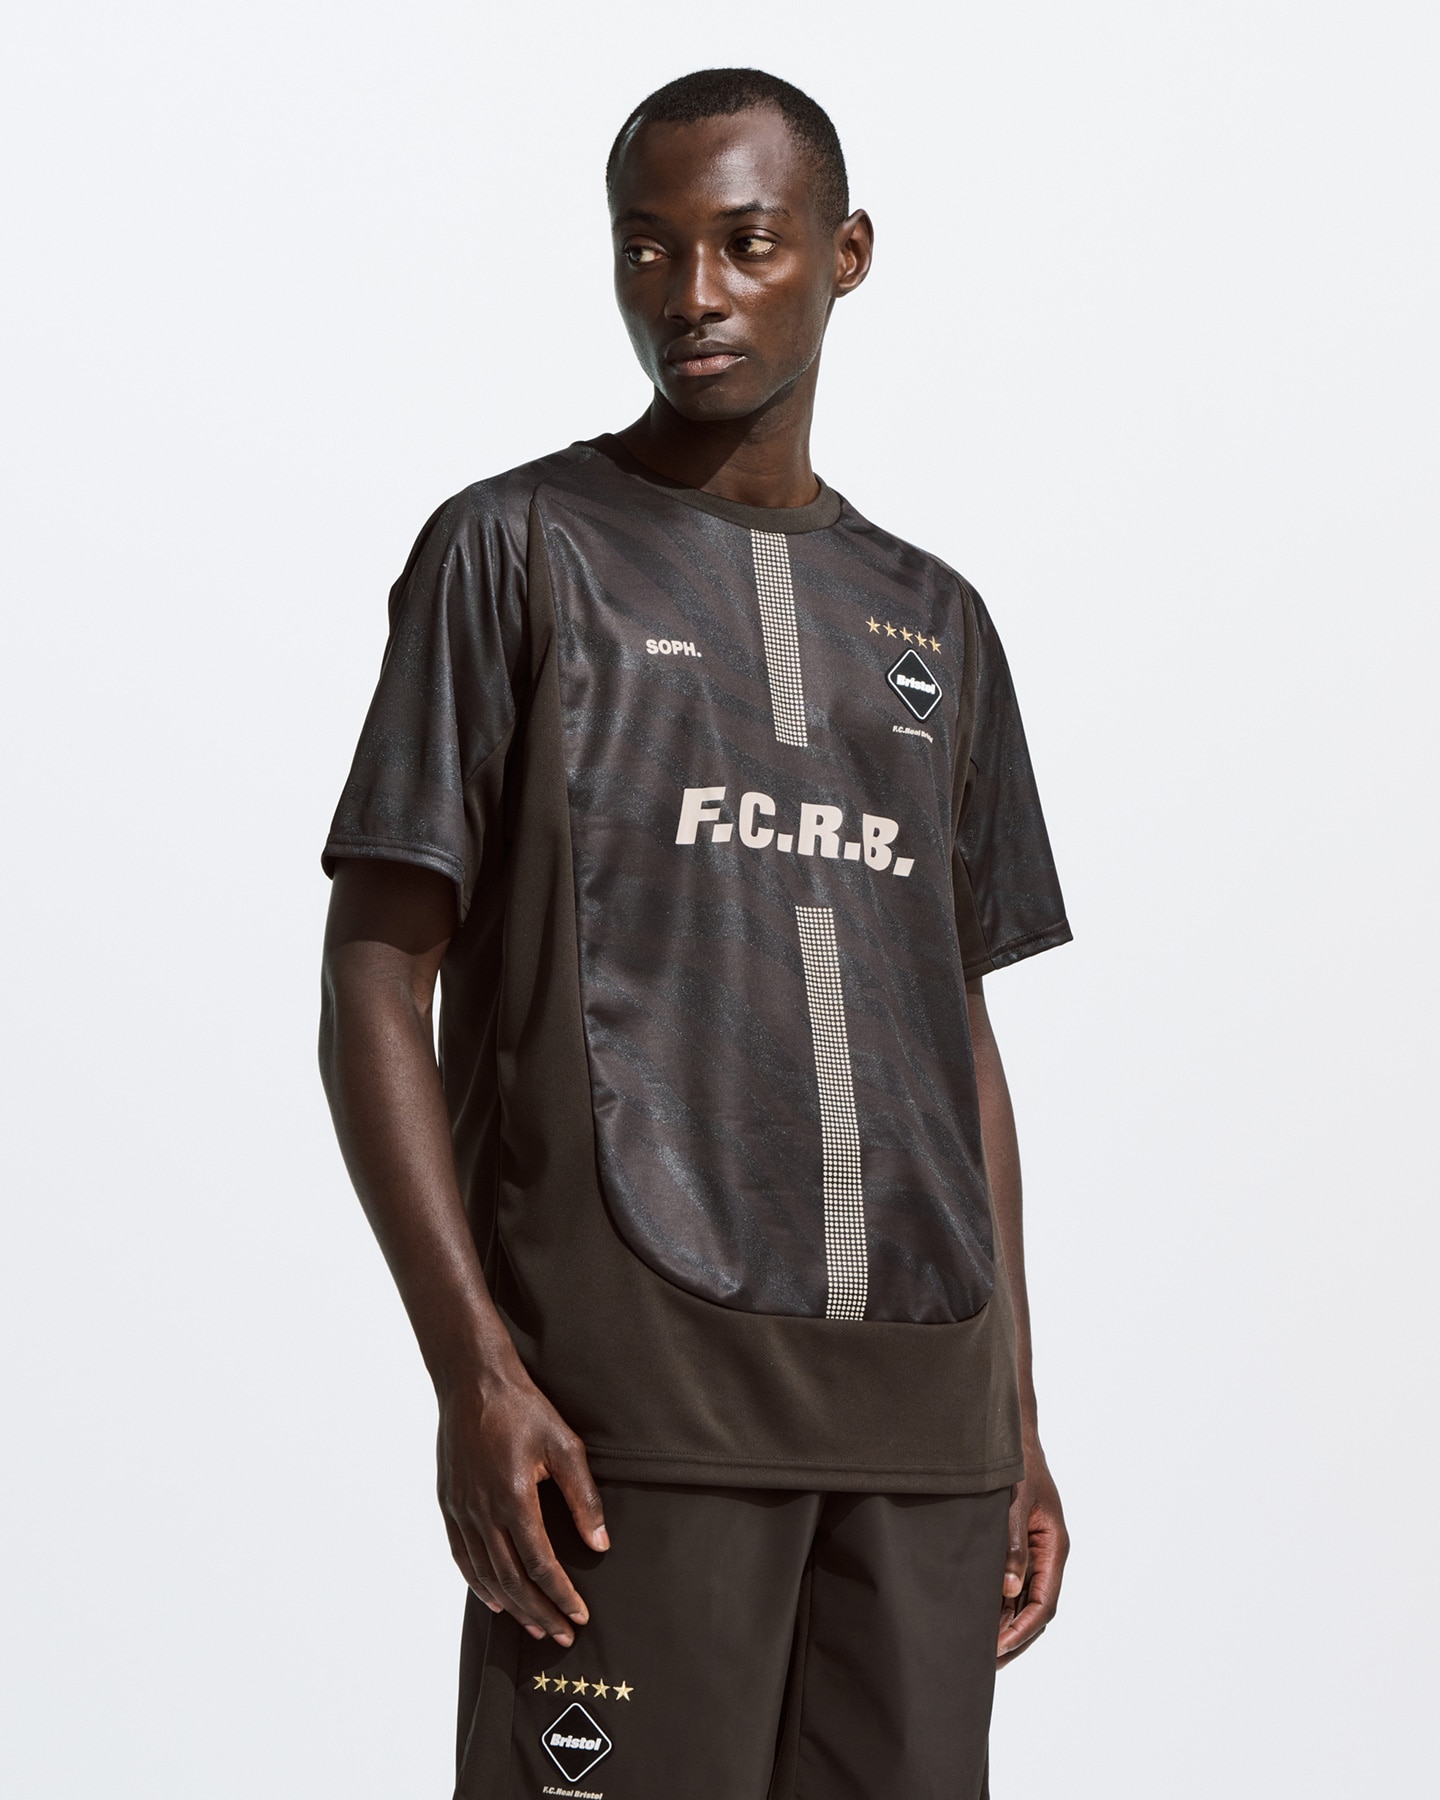 SOPH. | S/S PRE MATCH TOP(M BROWN):